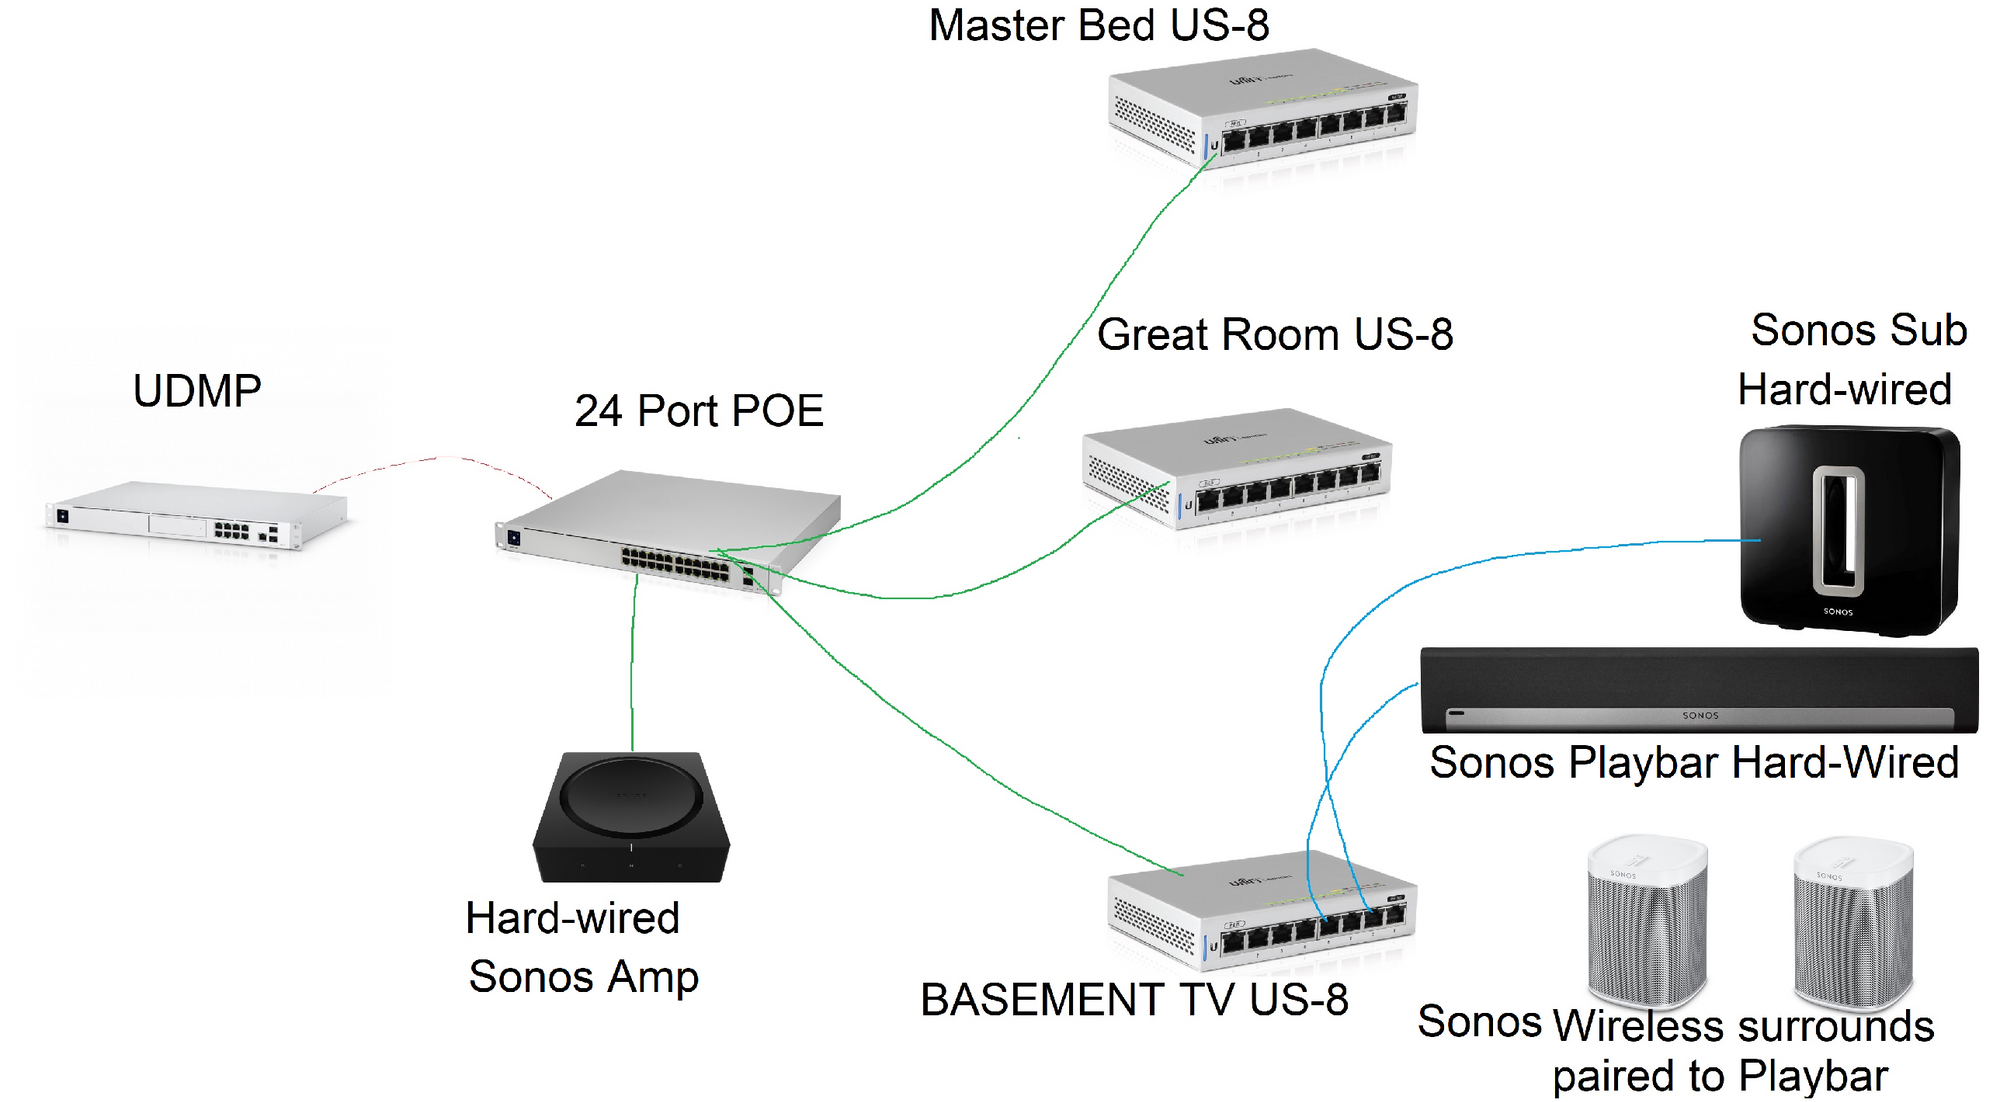 Lighed Lam skrivebord Sonos STP settings - What are your go to settings that actually yield  success in network stability, when you have mixed use of wired & wireless  Sonos gear? | Ubiquiti Community